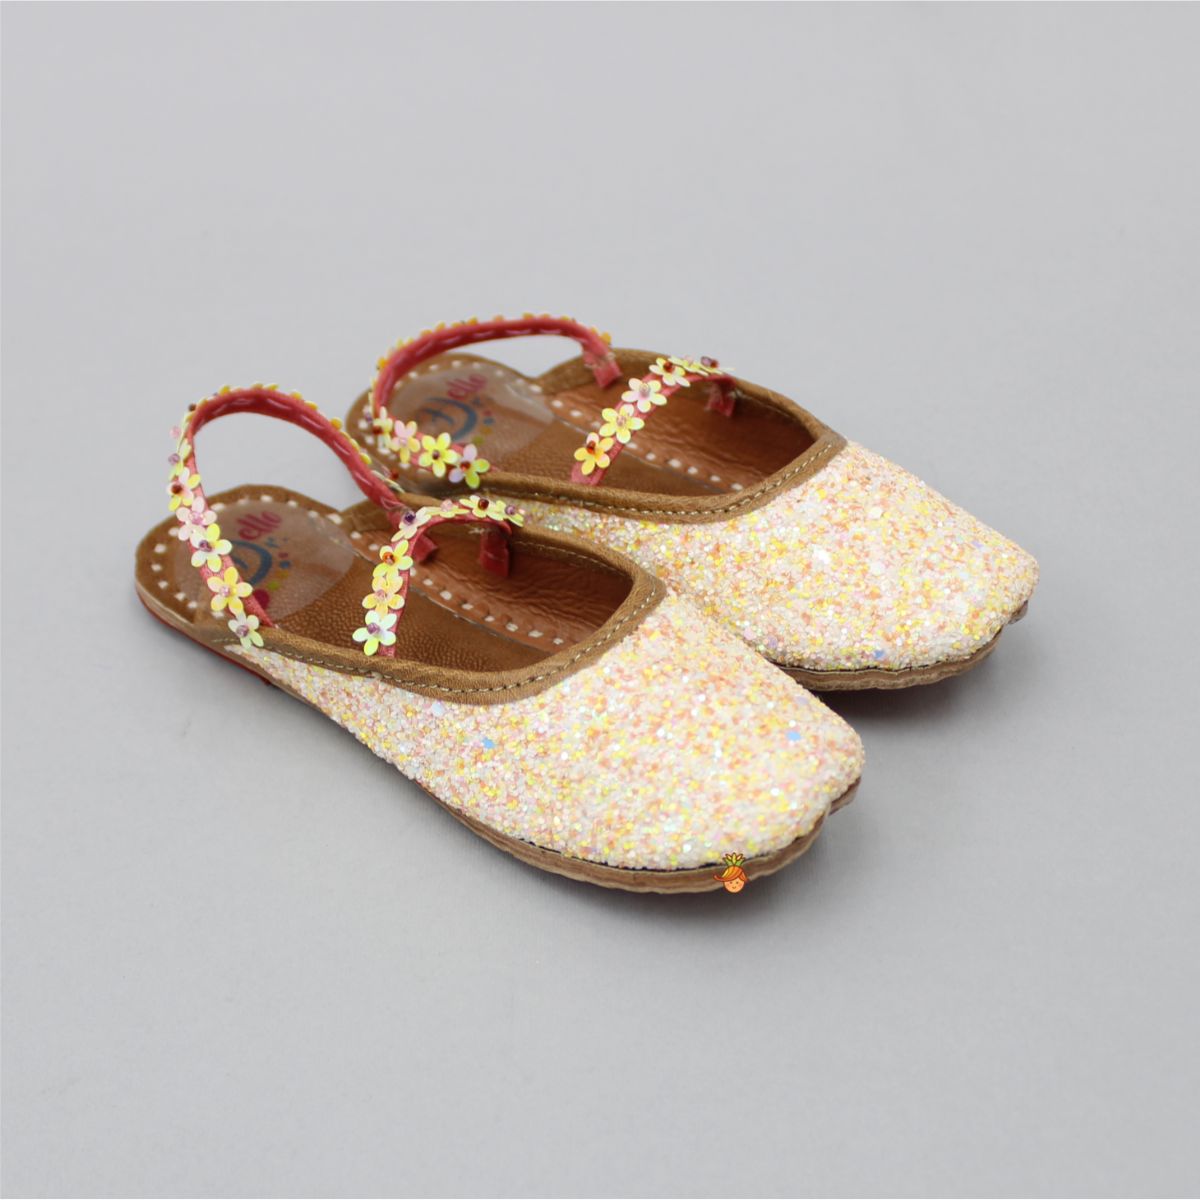 Shimmery Light Yellow Floral Jutti